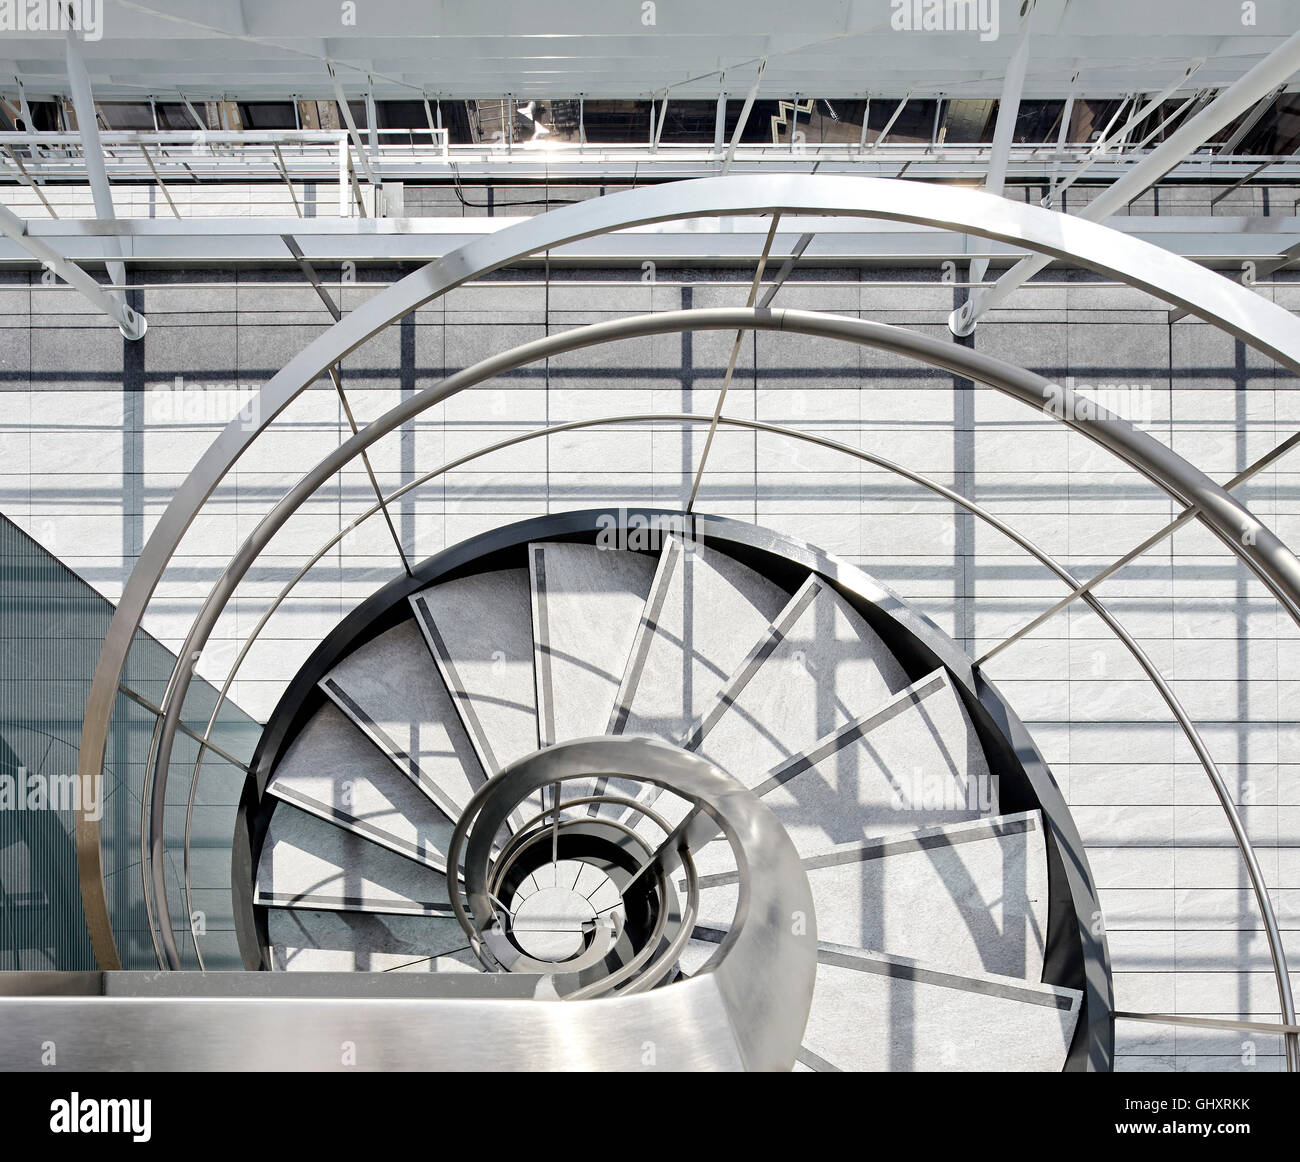 Metal spiral staircase viewed from above. 70 Mark Lane - City of London, London, United Kingdom. Architect: Bennetts Associates Stock Photo